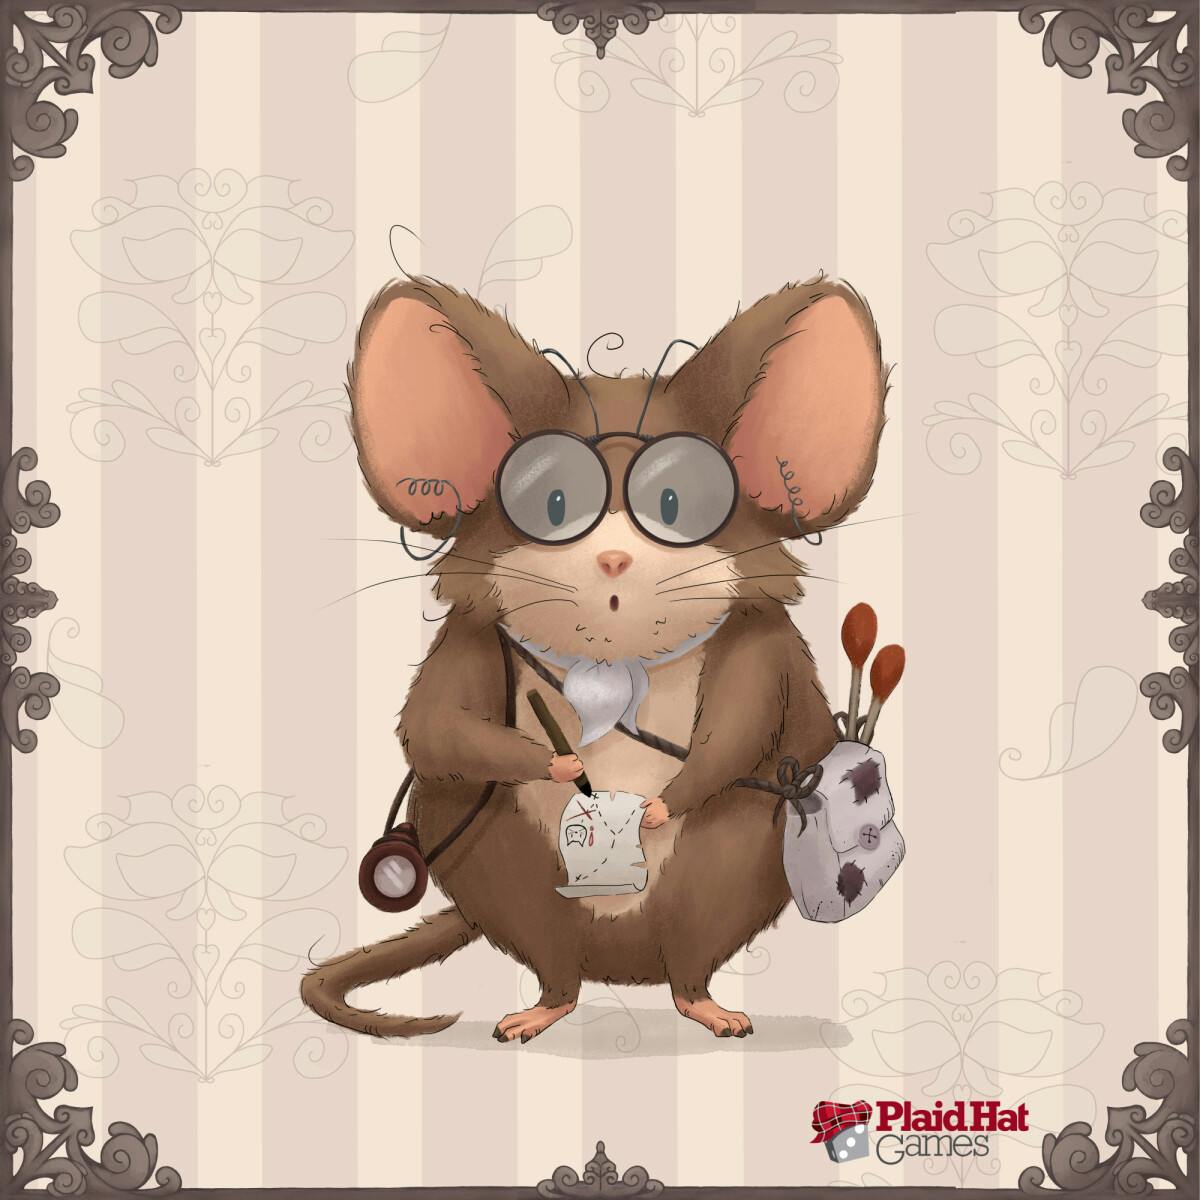 A mouse wearing glasses